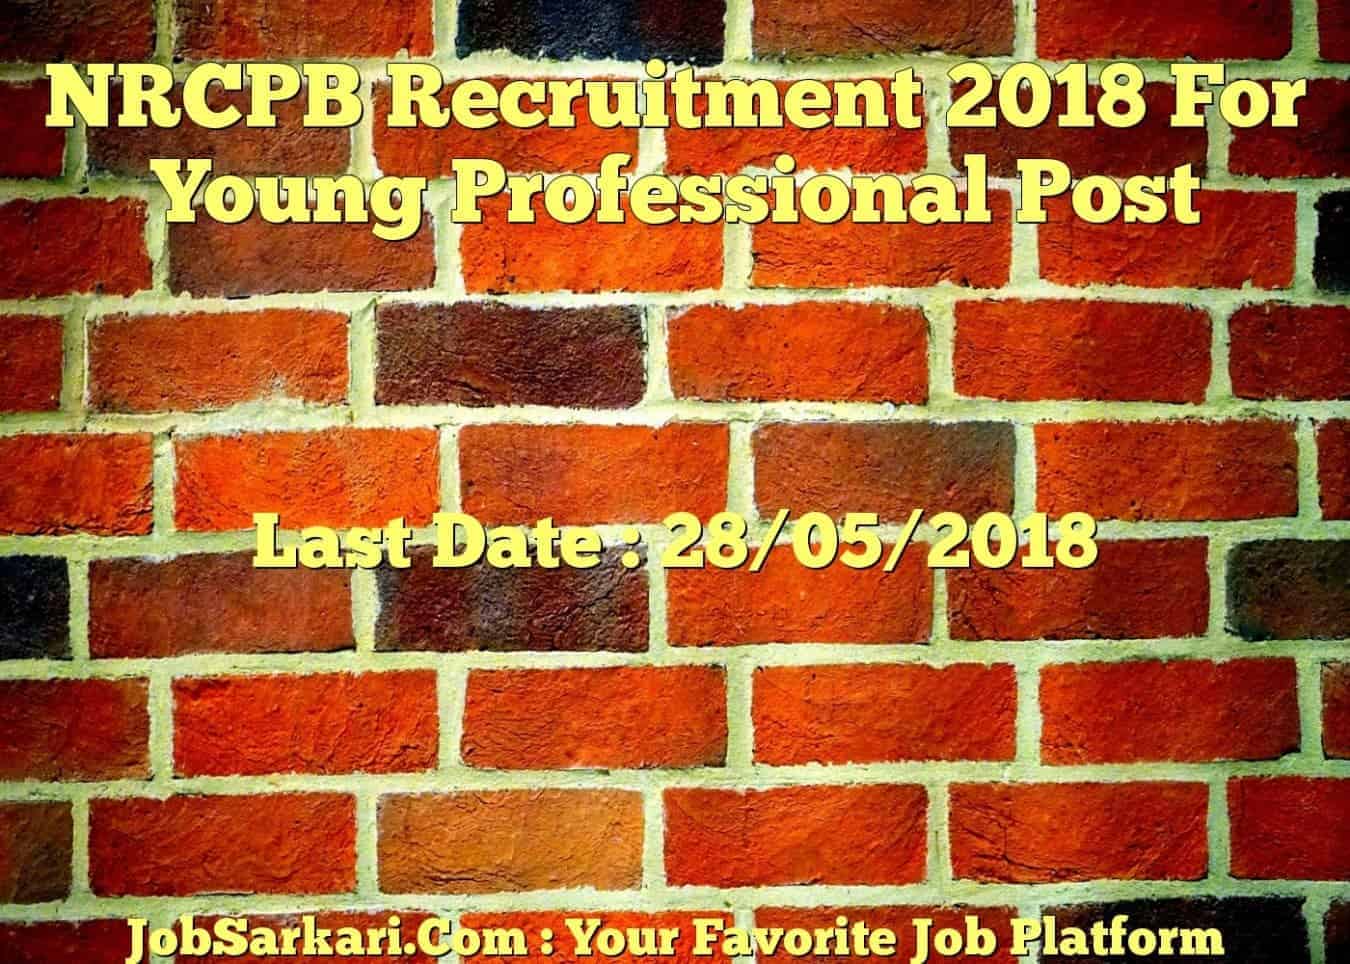 NRCPB Recruitment 2018 For Young Professional Post